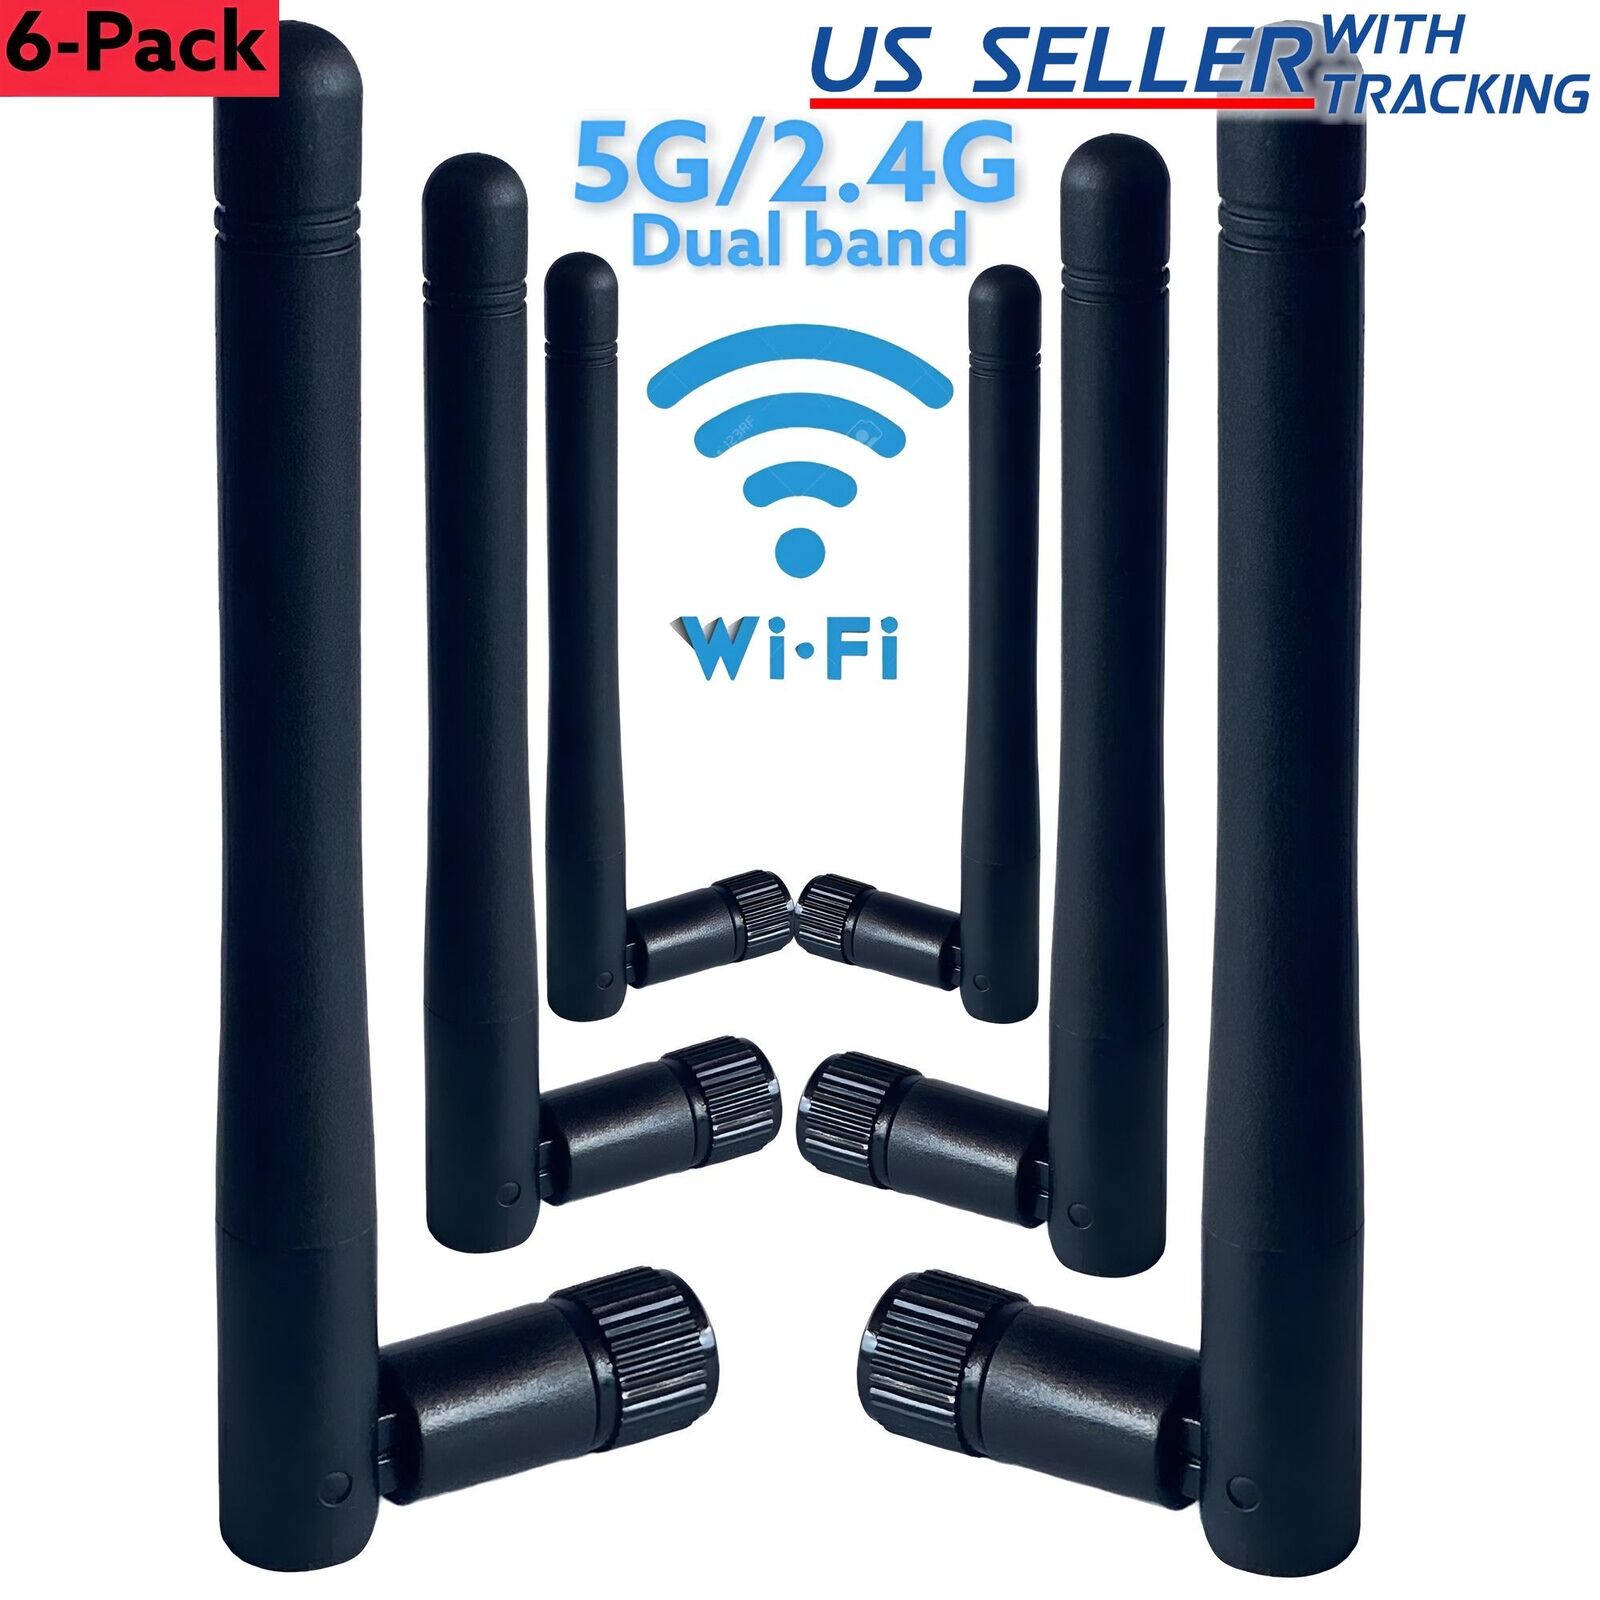 6-PACK LOT RP-SMA Antenna for WiFi 2.4GHz/5Ghz Wireless Router or Card (Black)